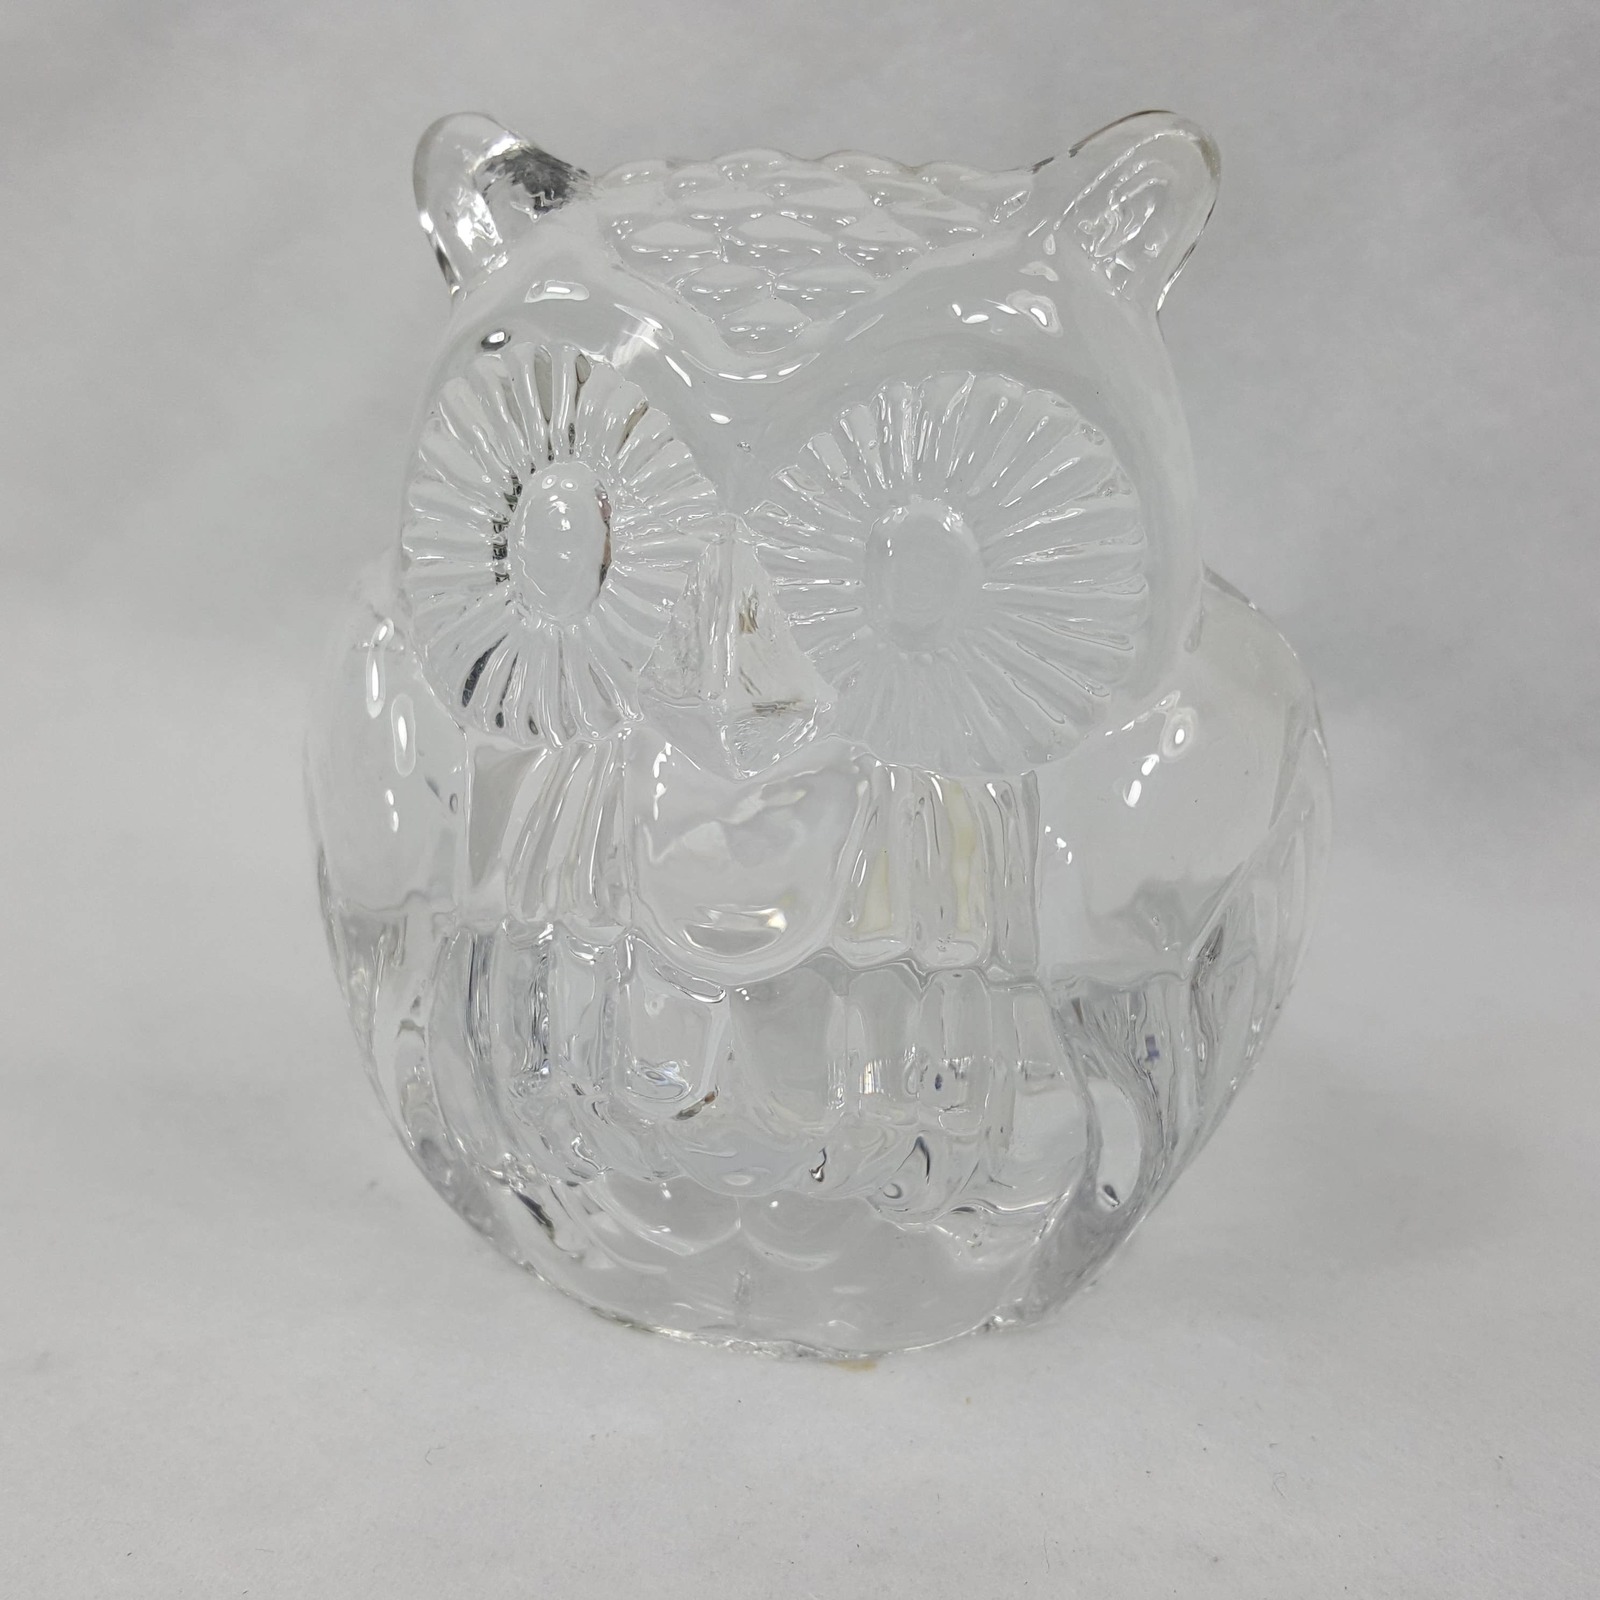 Owl Glass Tea-light Holder by Partylite Clear Glass 4" tall AGFX1 - $13.00